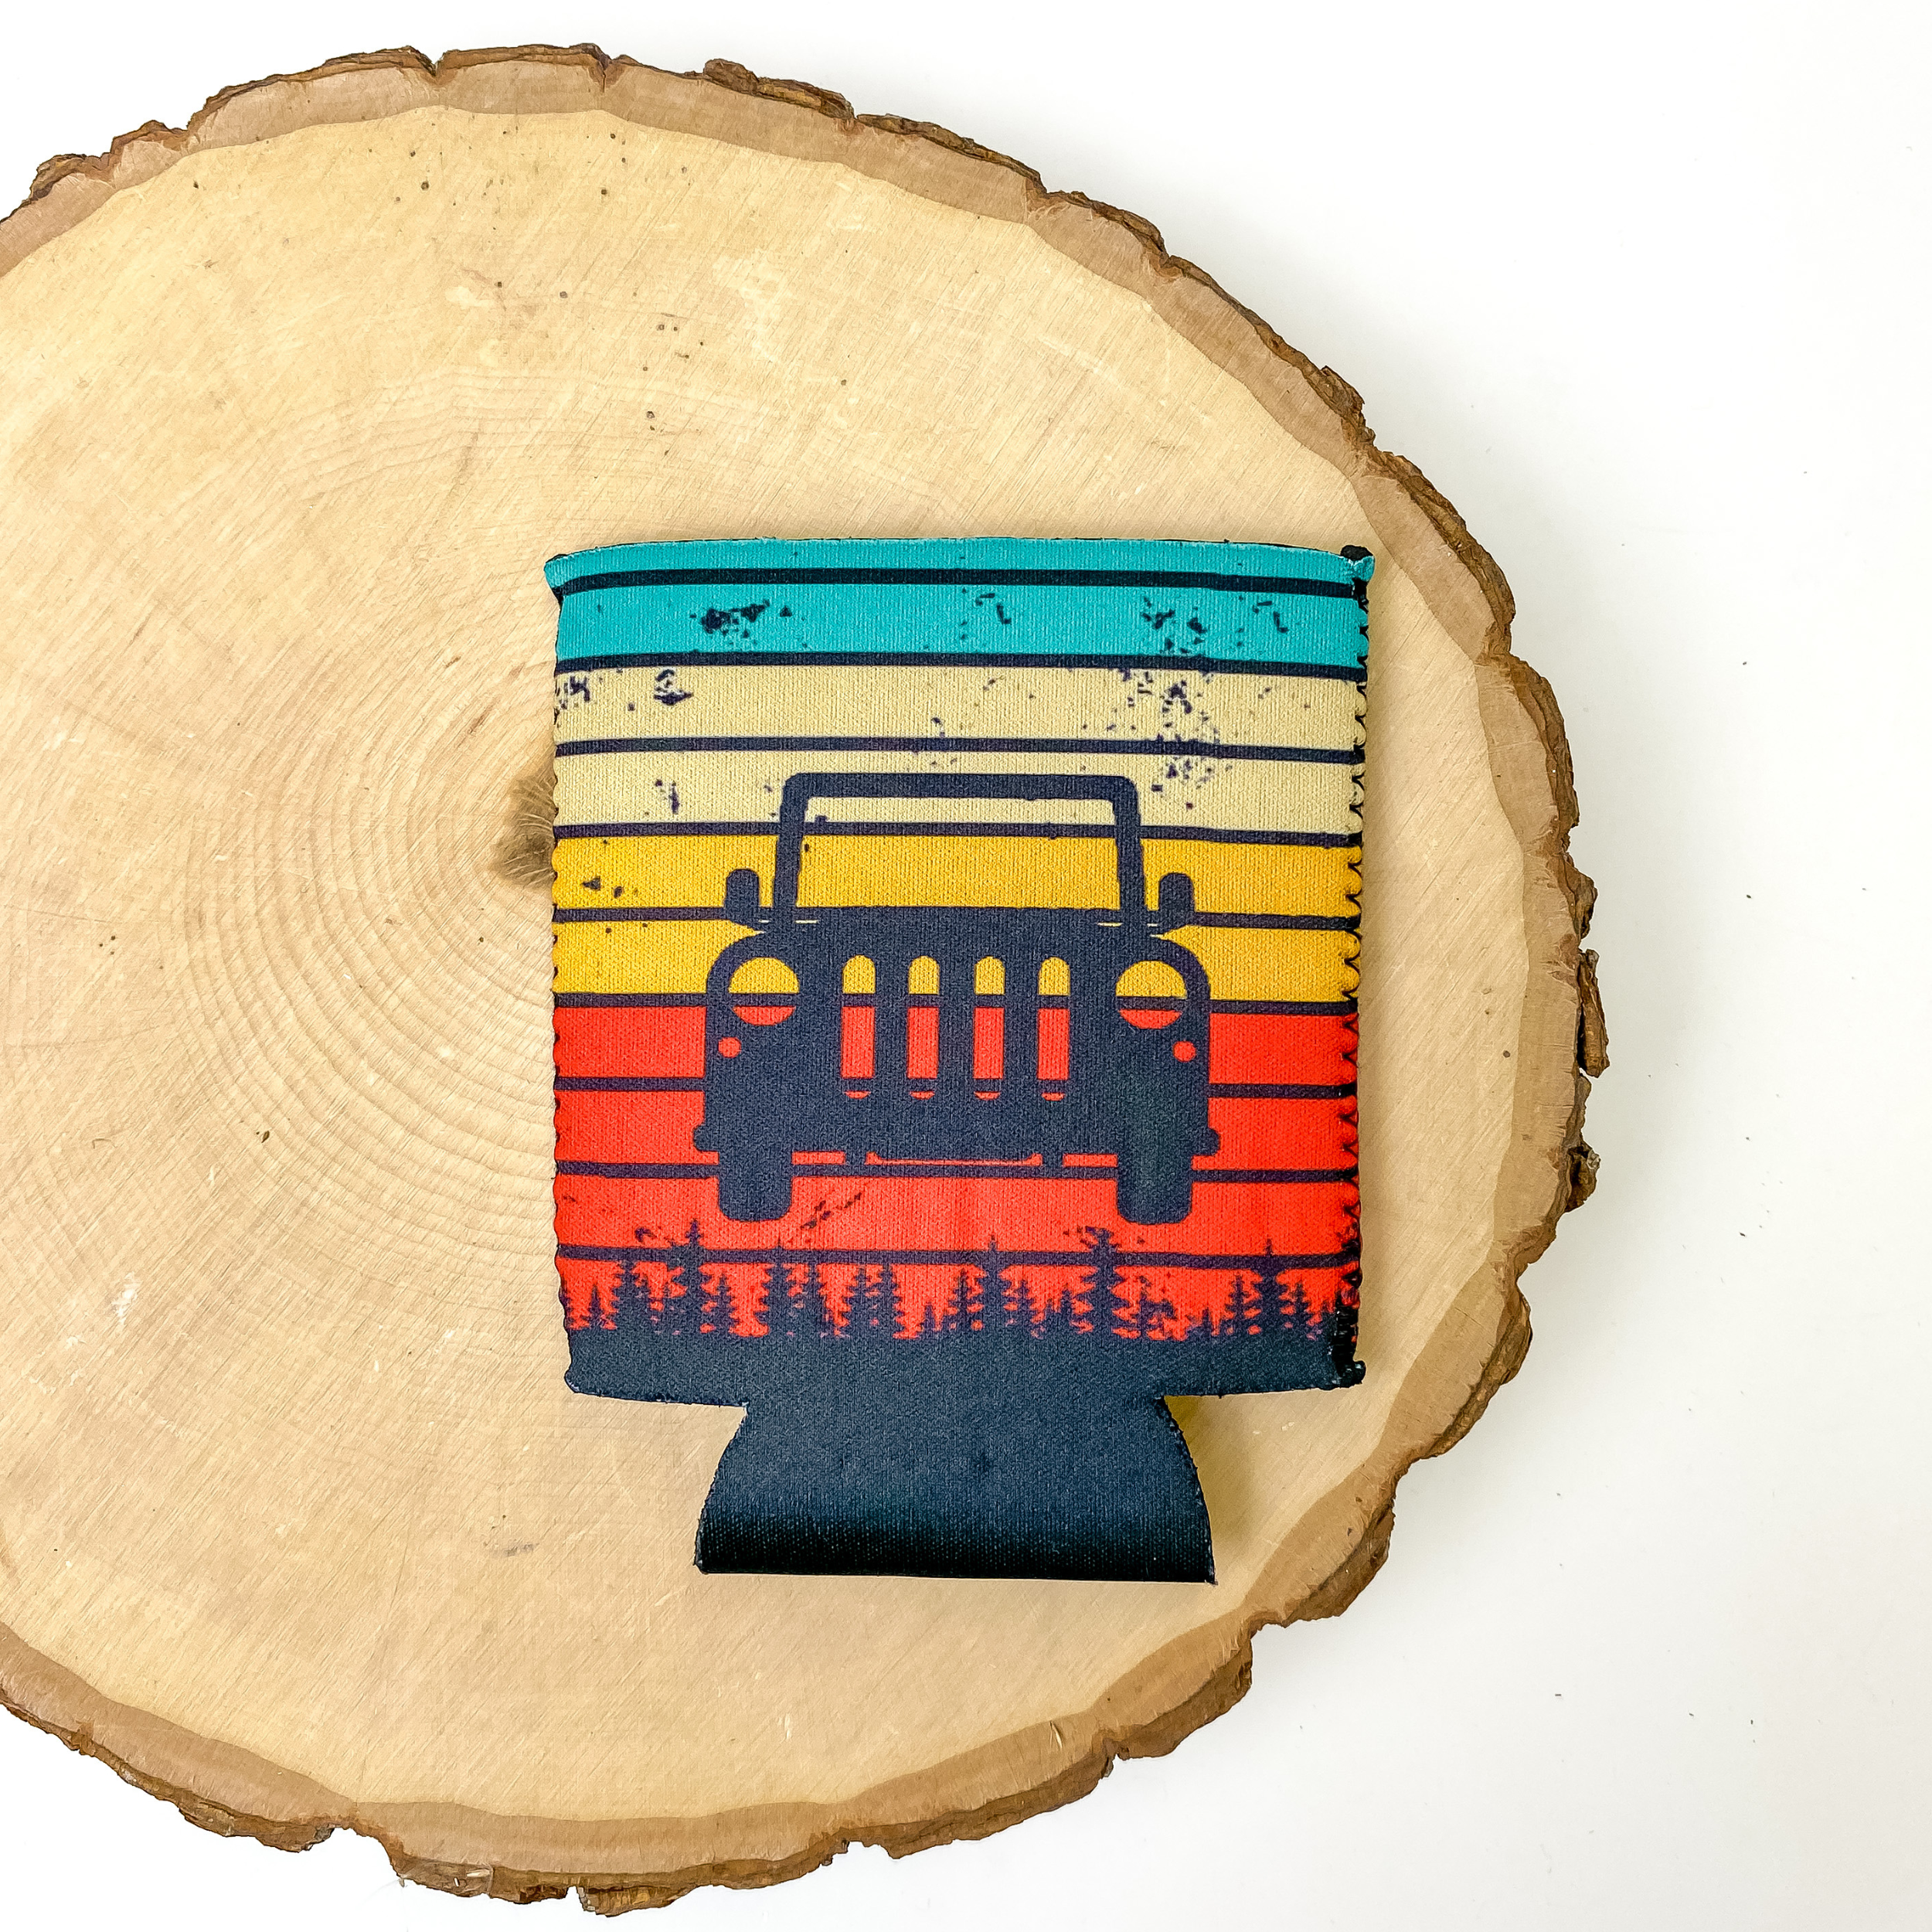 Koozie with red, ivory, and turquoise pattern with a car design. This koozie is pictured on a piece of wood on a white background.